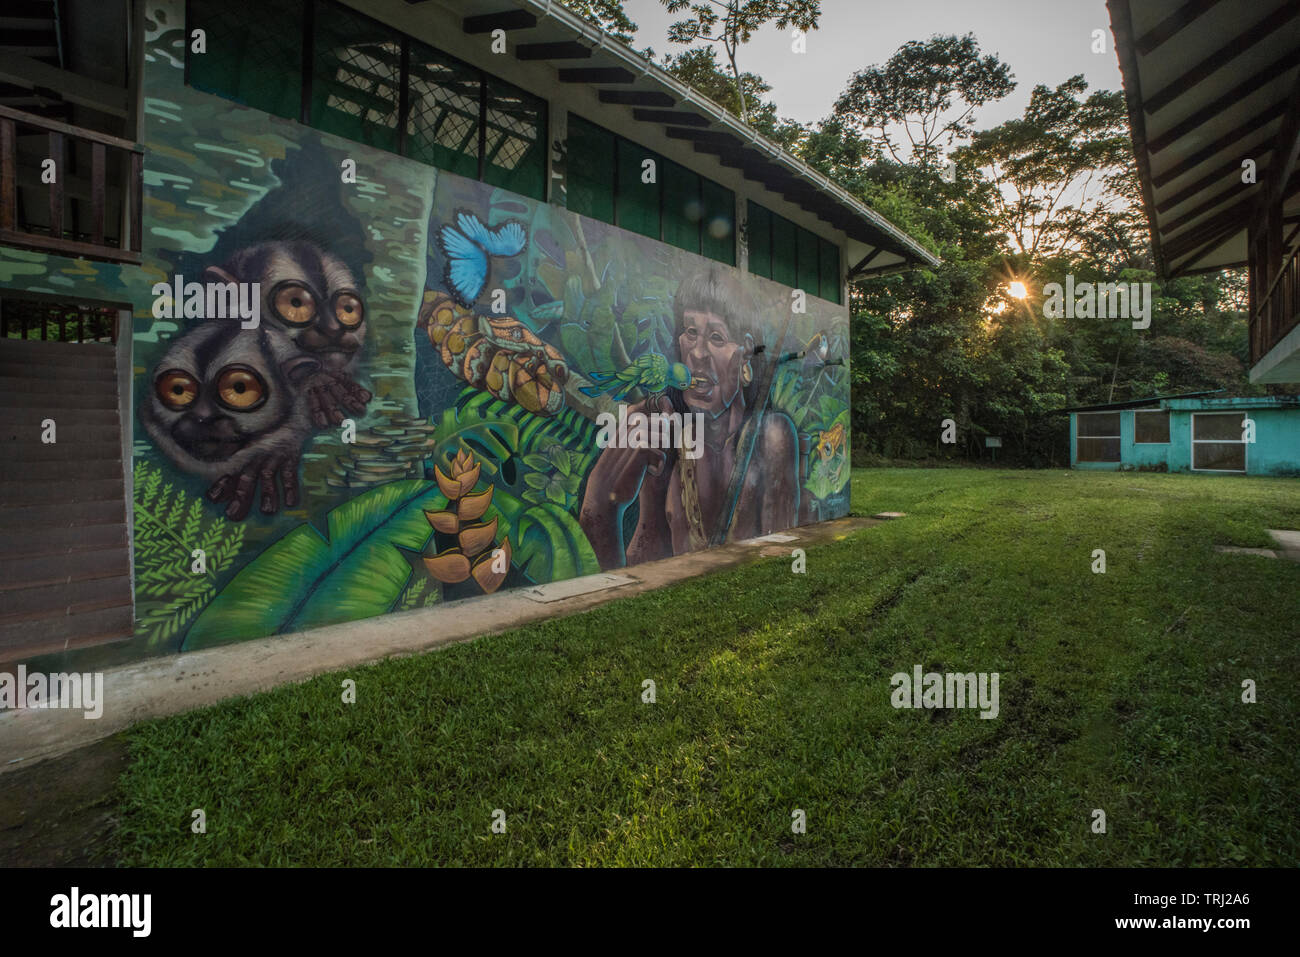 The sun sets over Yasuni research station in Ecuador, a mural depicting nature is visible on the side of a building. Stock Photo